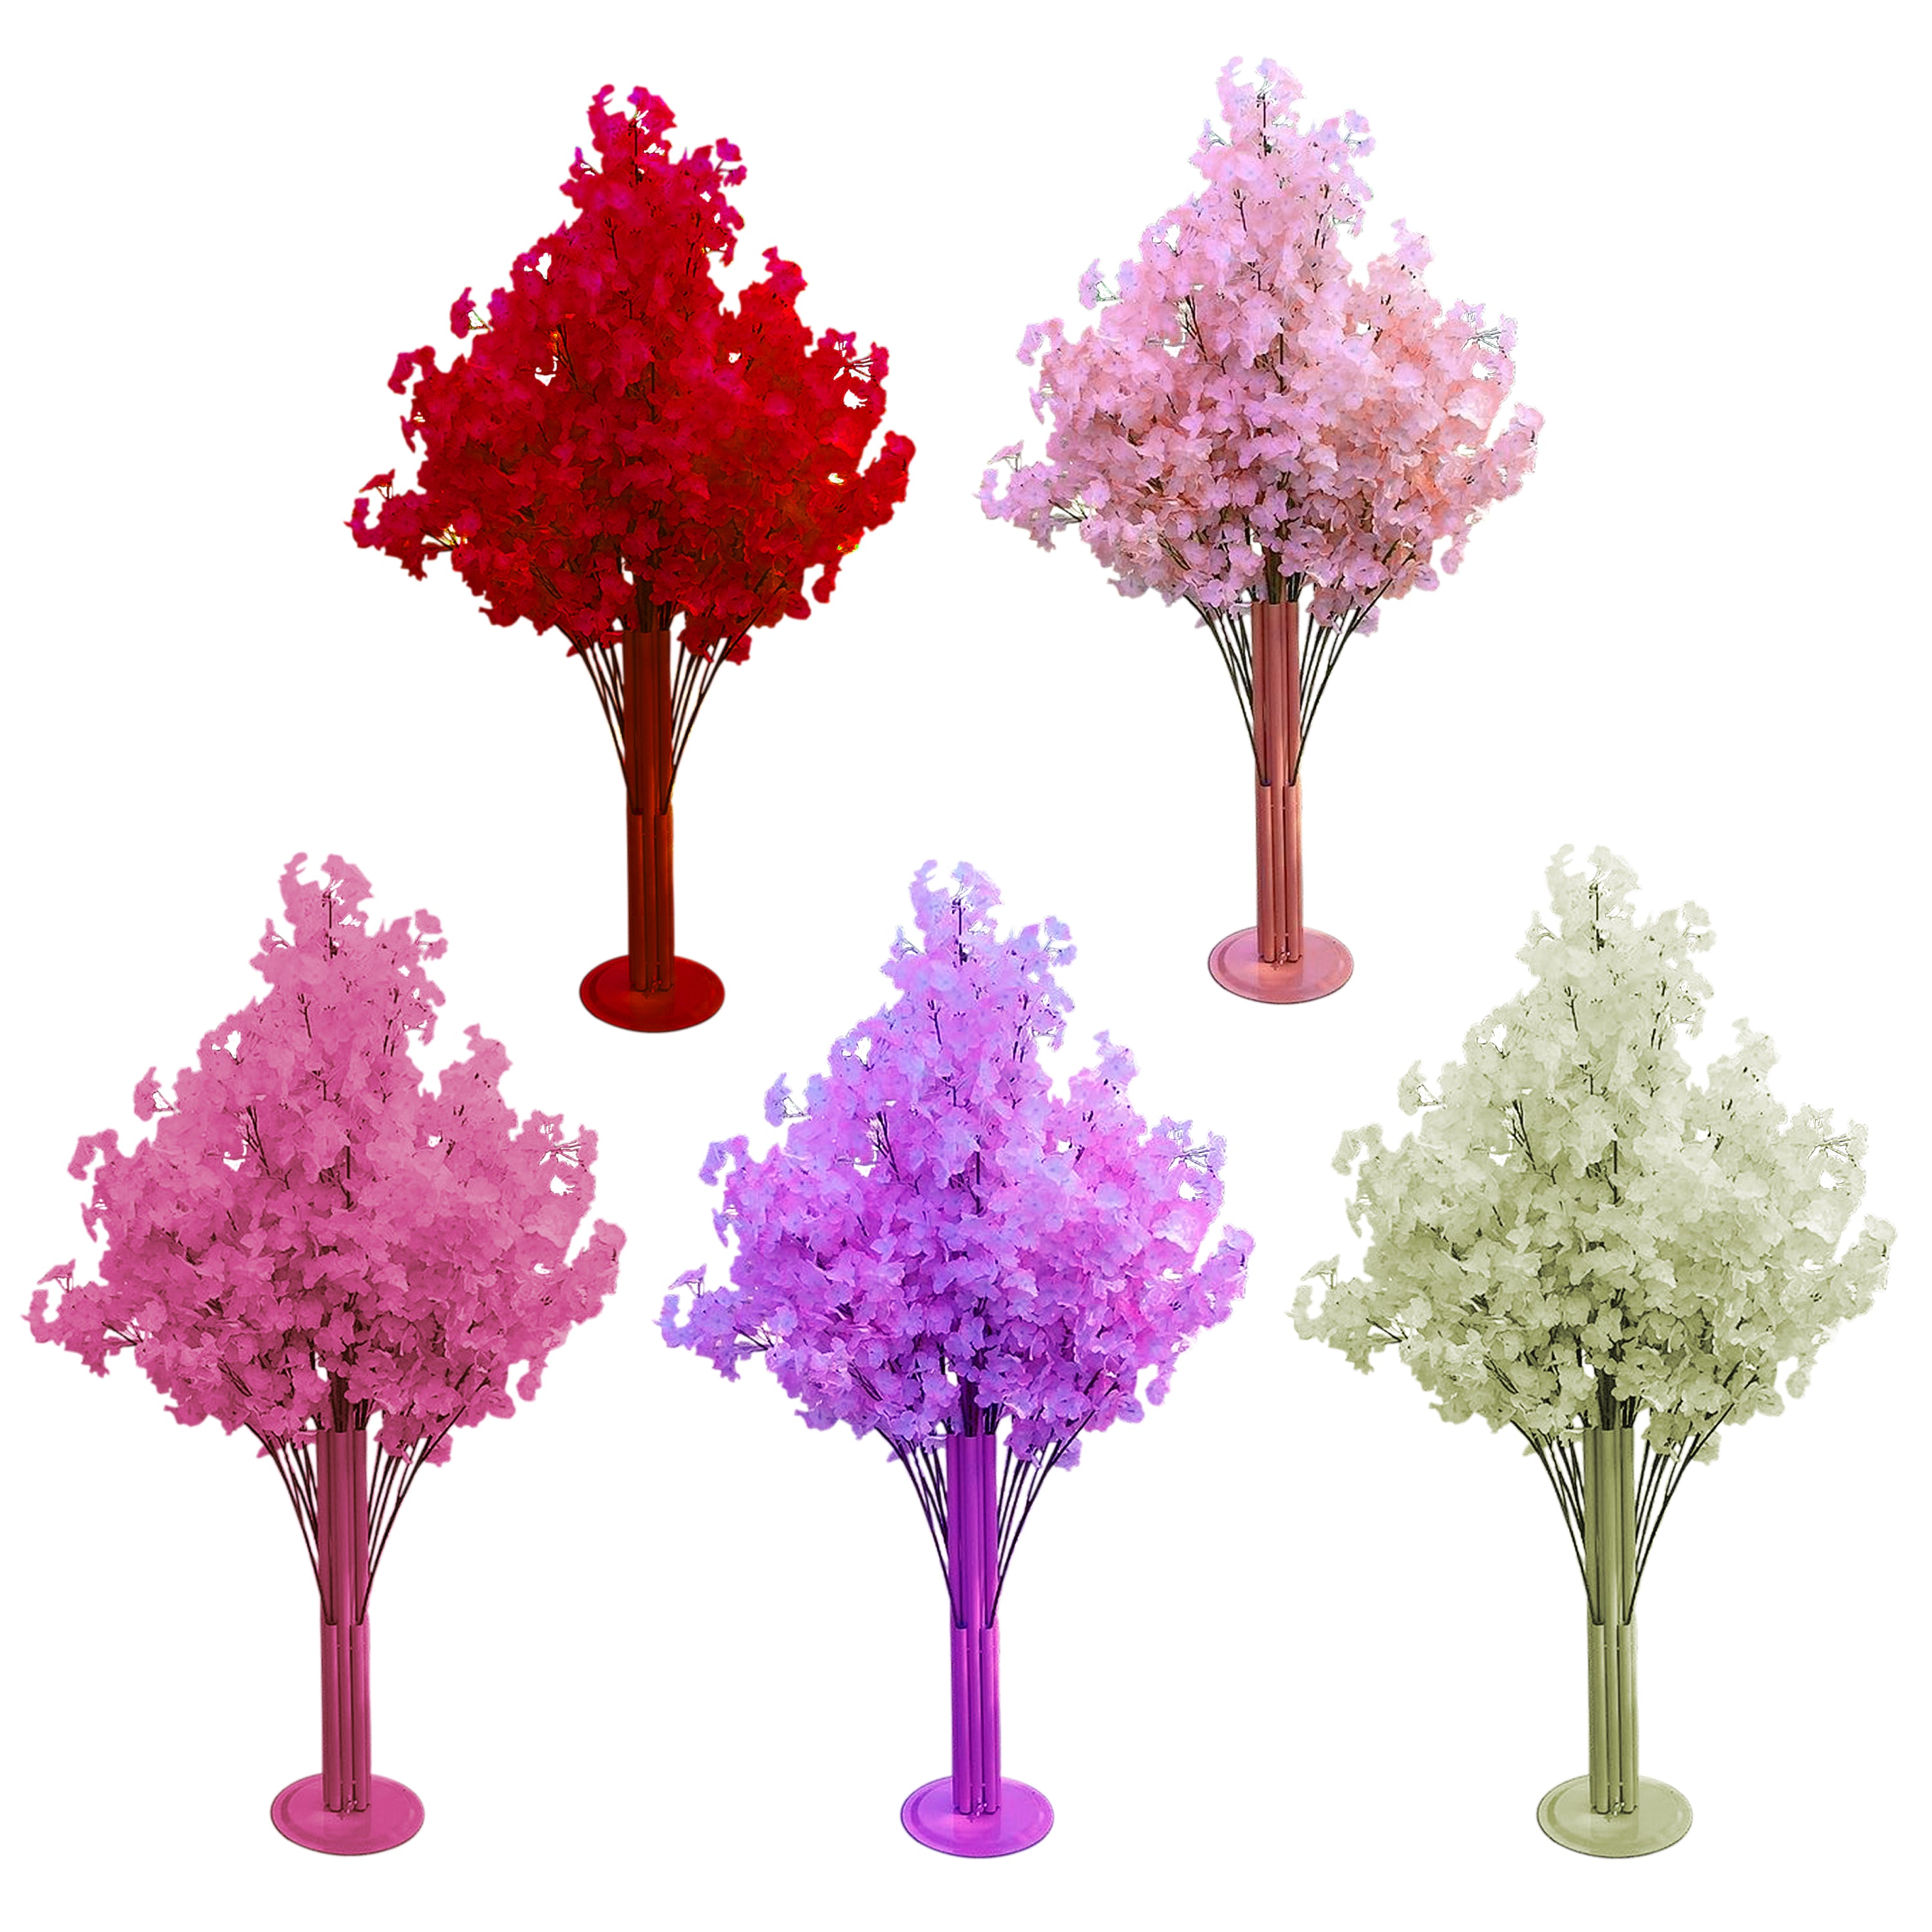 Cherry Blossom Tree Stand Colour - Purpel, Rani, White, Pink, Red.